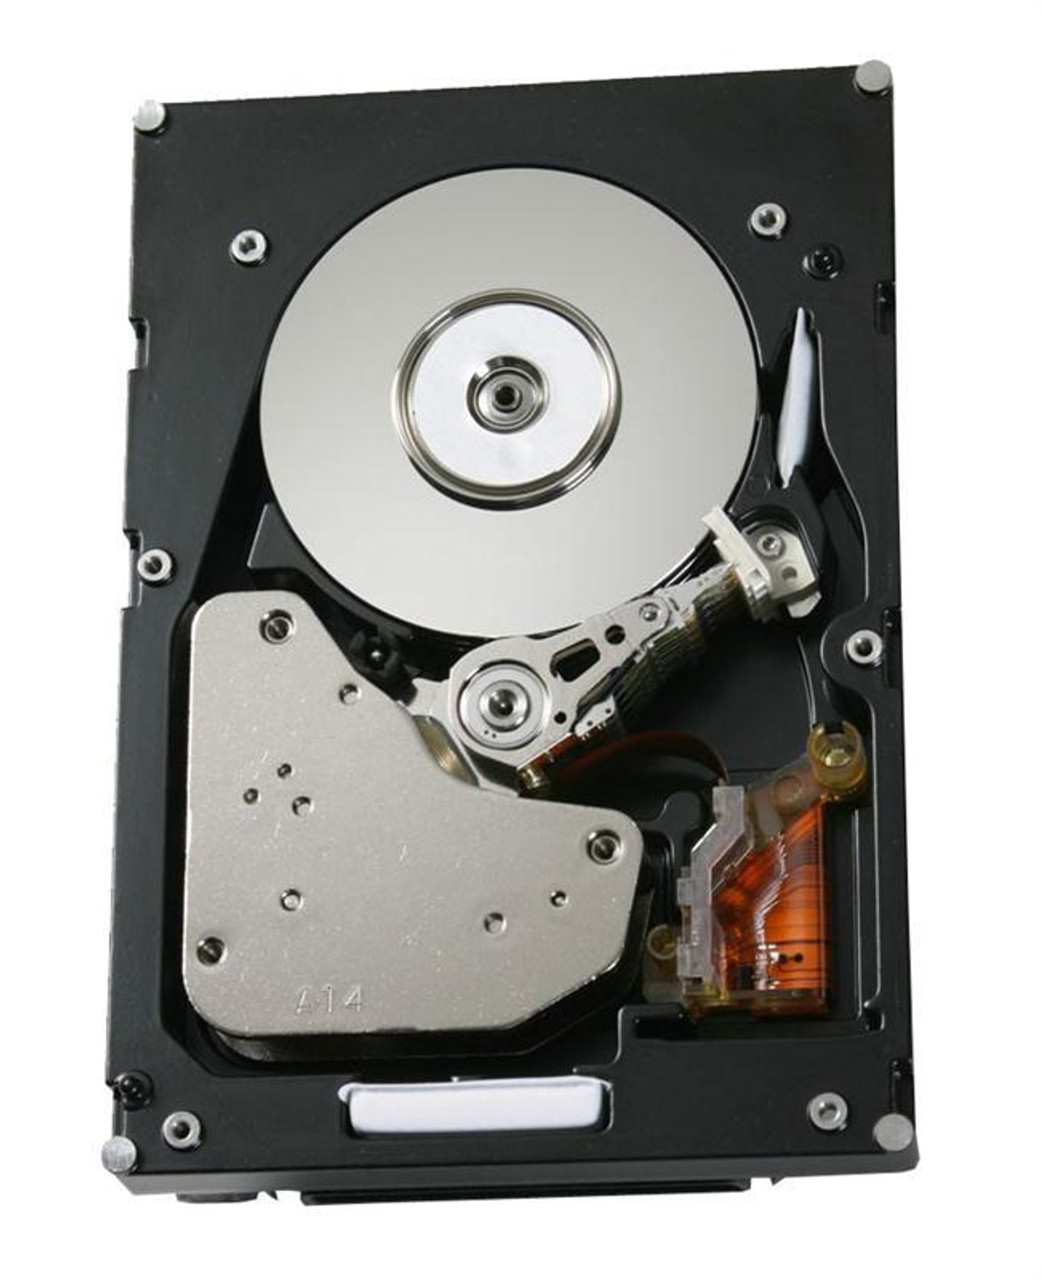 5048589 EMC 73GB 15000RPM Fibre Channel 2Gbps 16MB Cache 3.5-inch Internal Hard Drive for CLARiiON CX200/ CX700 Series Storage Systems